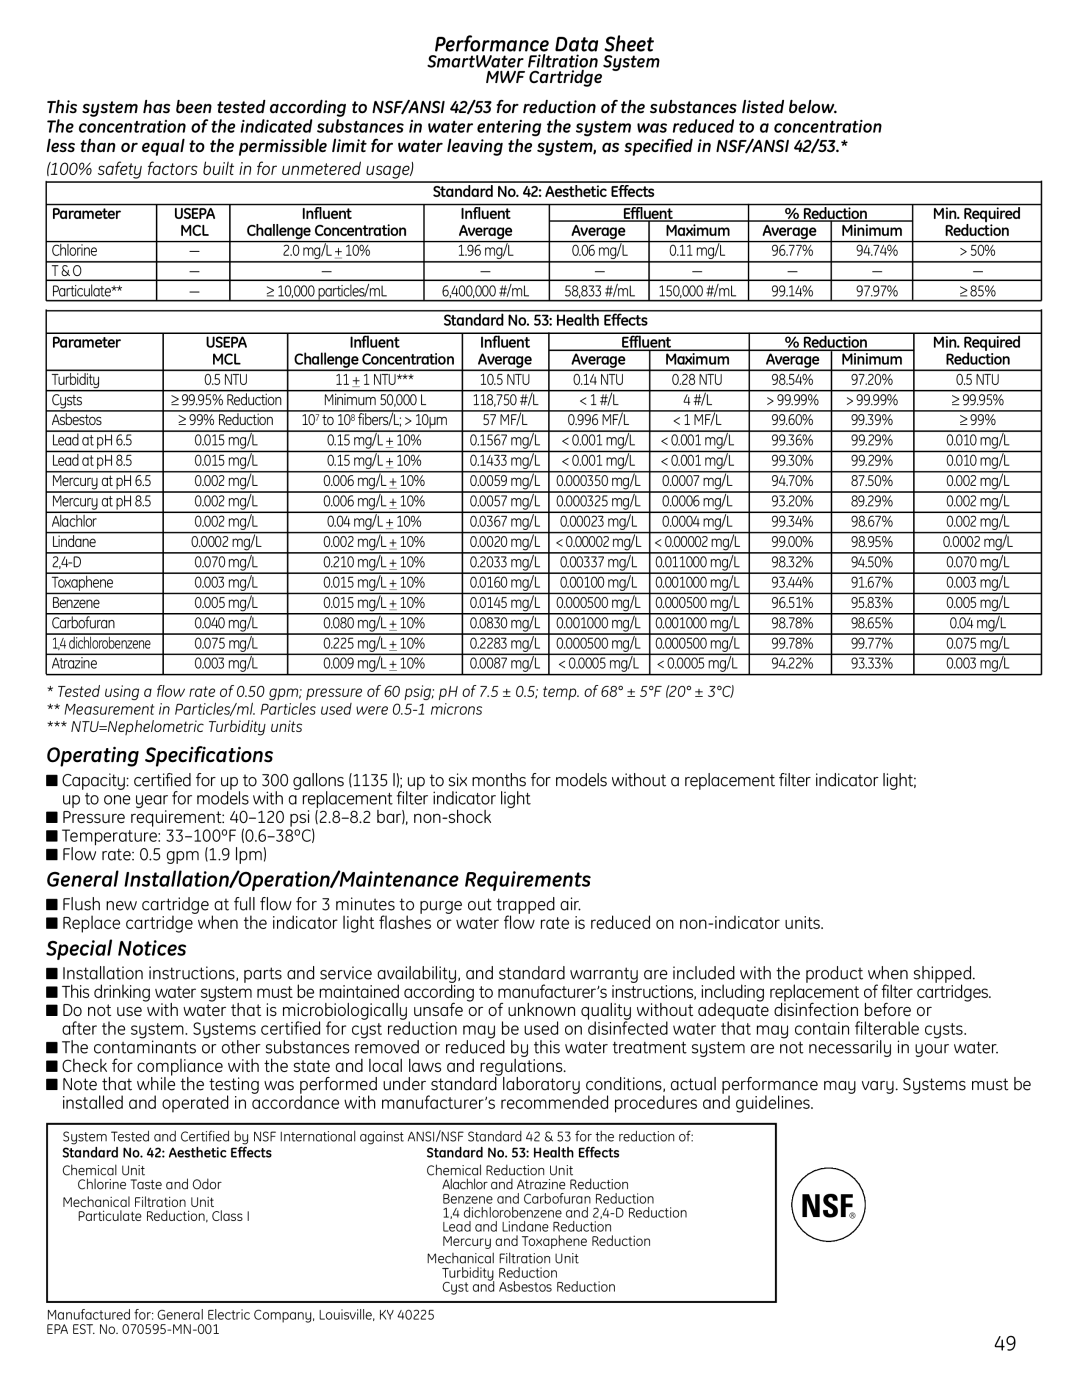 GE PFSS6SMXSS Performance Data Sheet, Operating Specifications, General Installation/Operation/Maintenance Requirements 